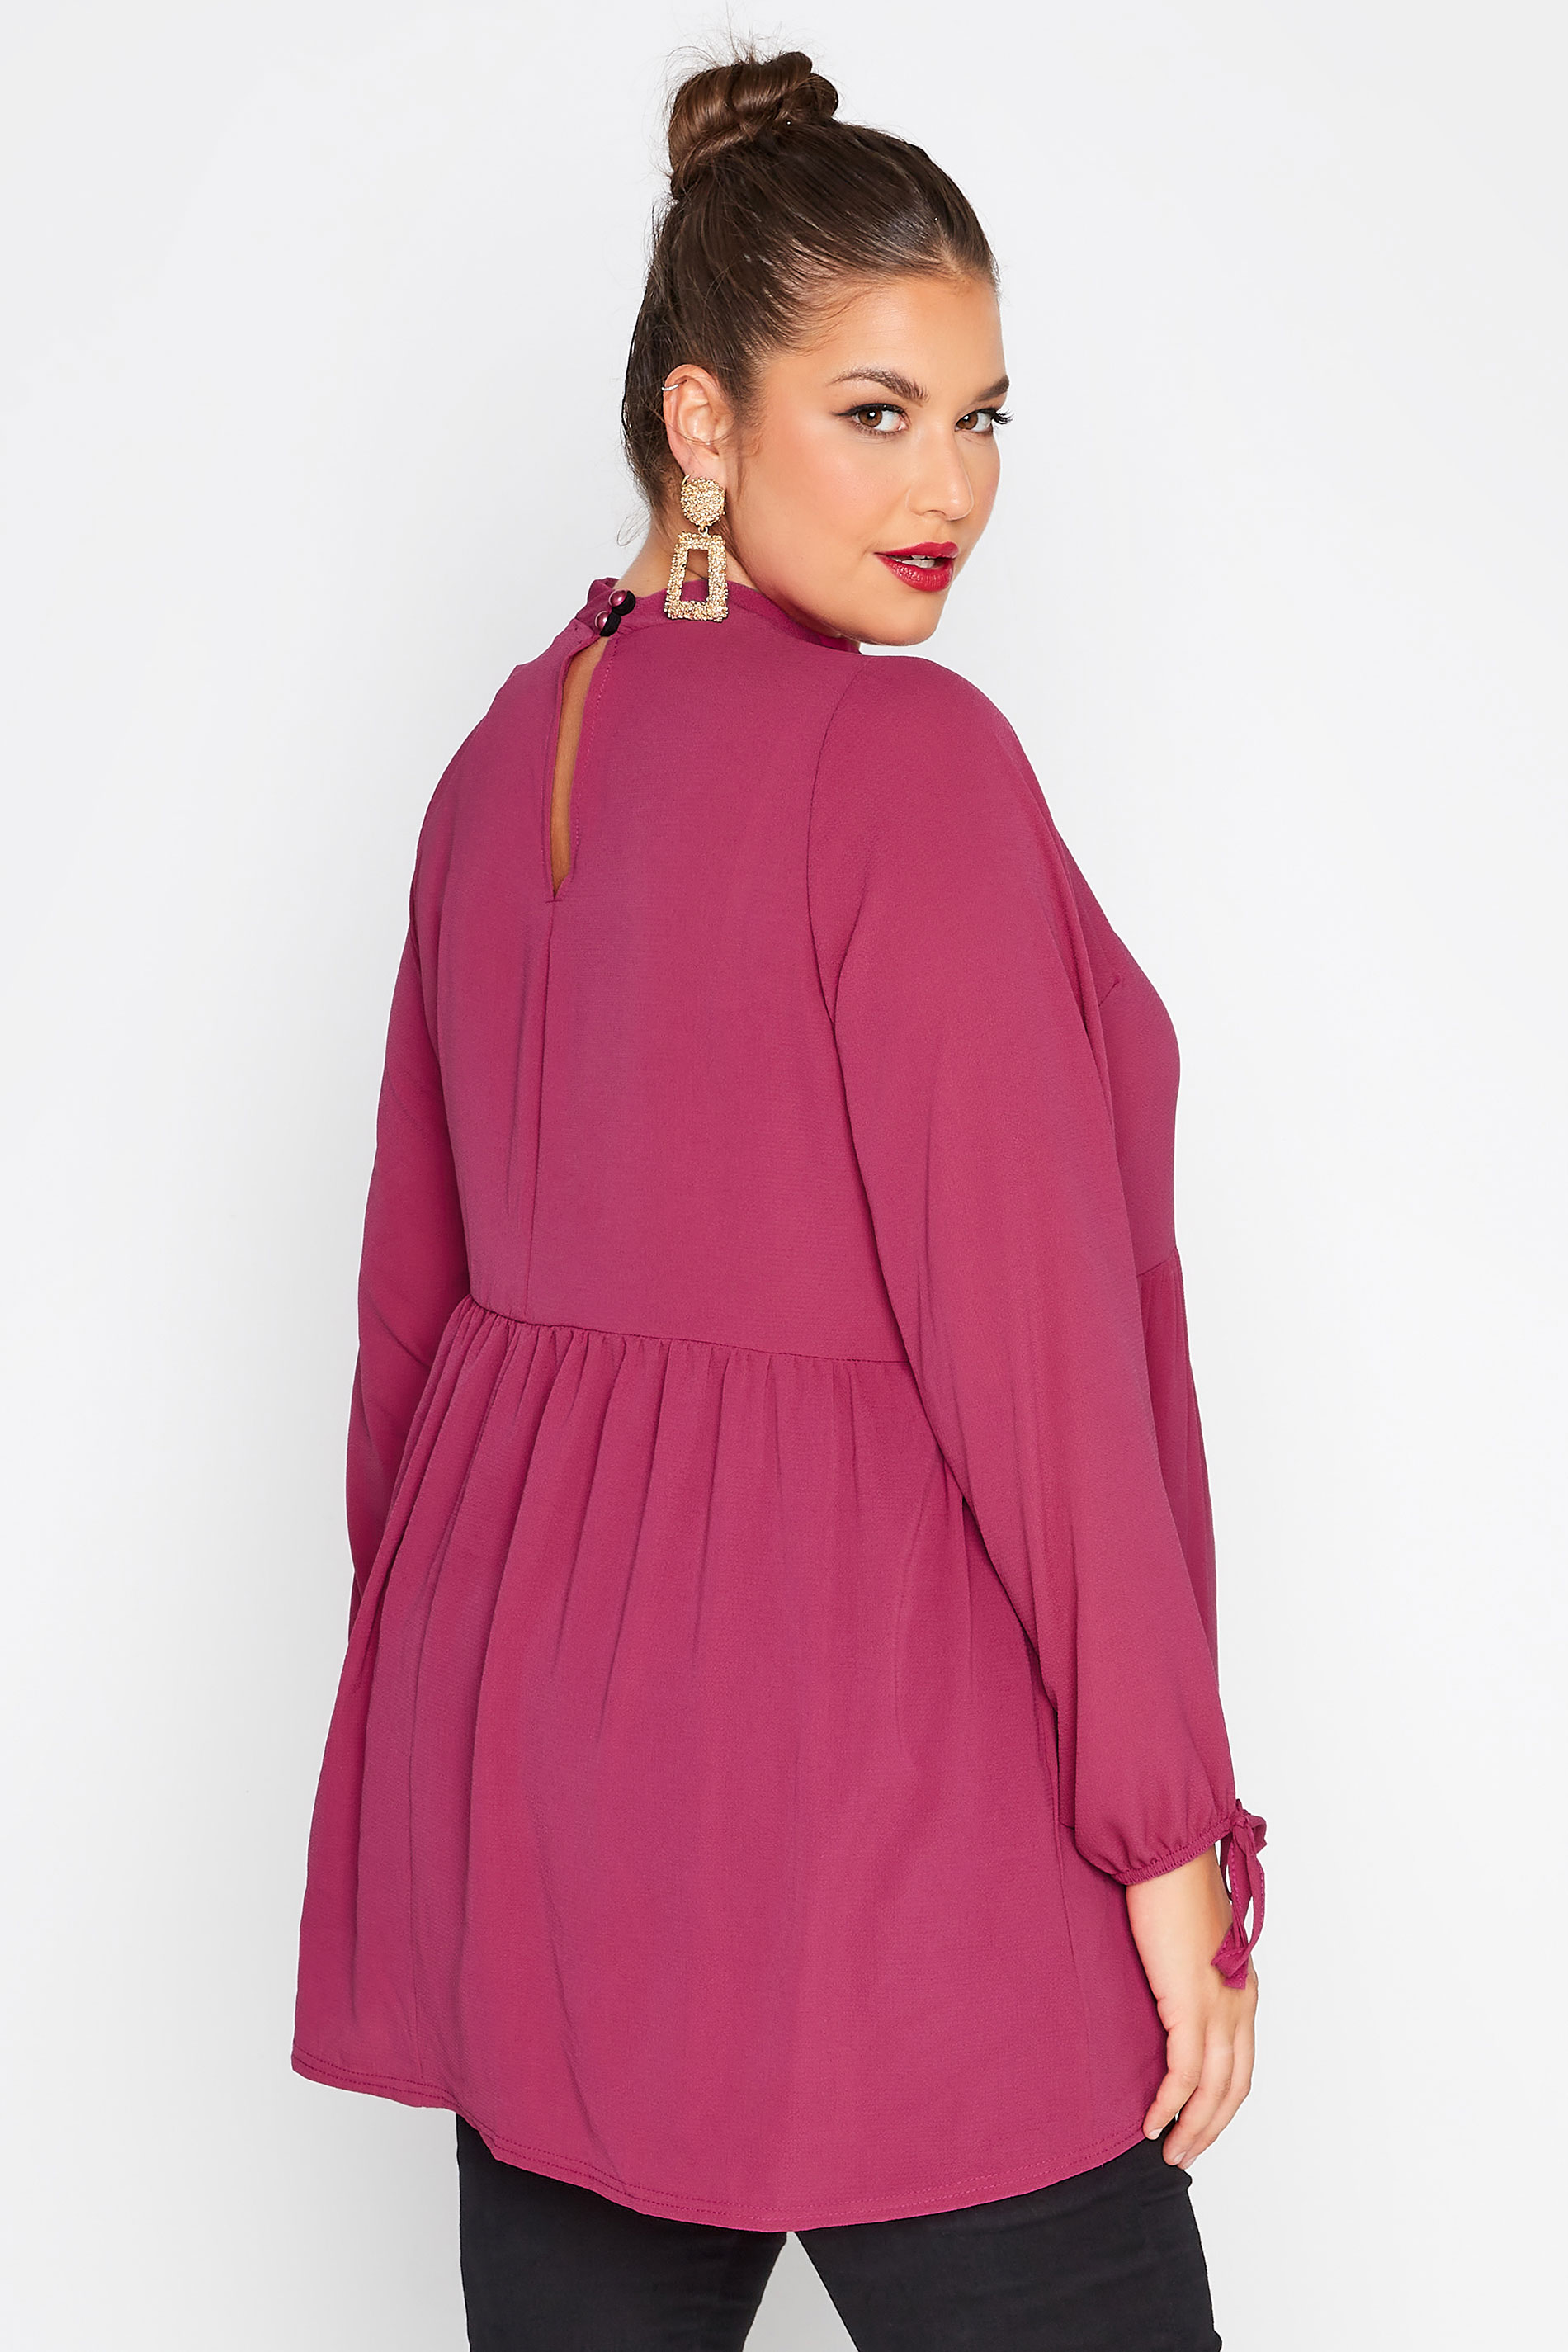 LIMITED COLLECTION Plus Size Dark Pink Turtle Neck Blouse | Yours Clothing 3